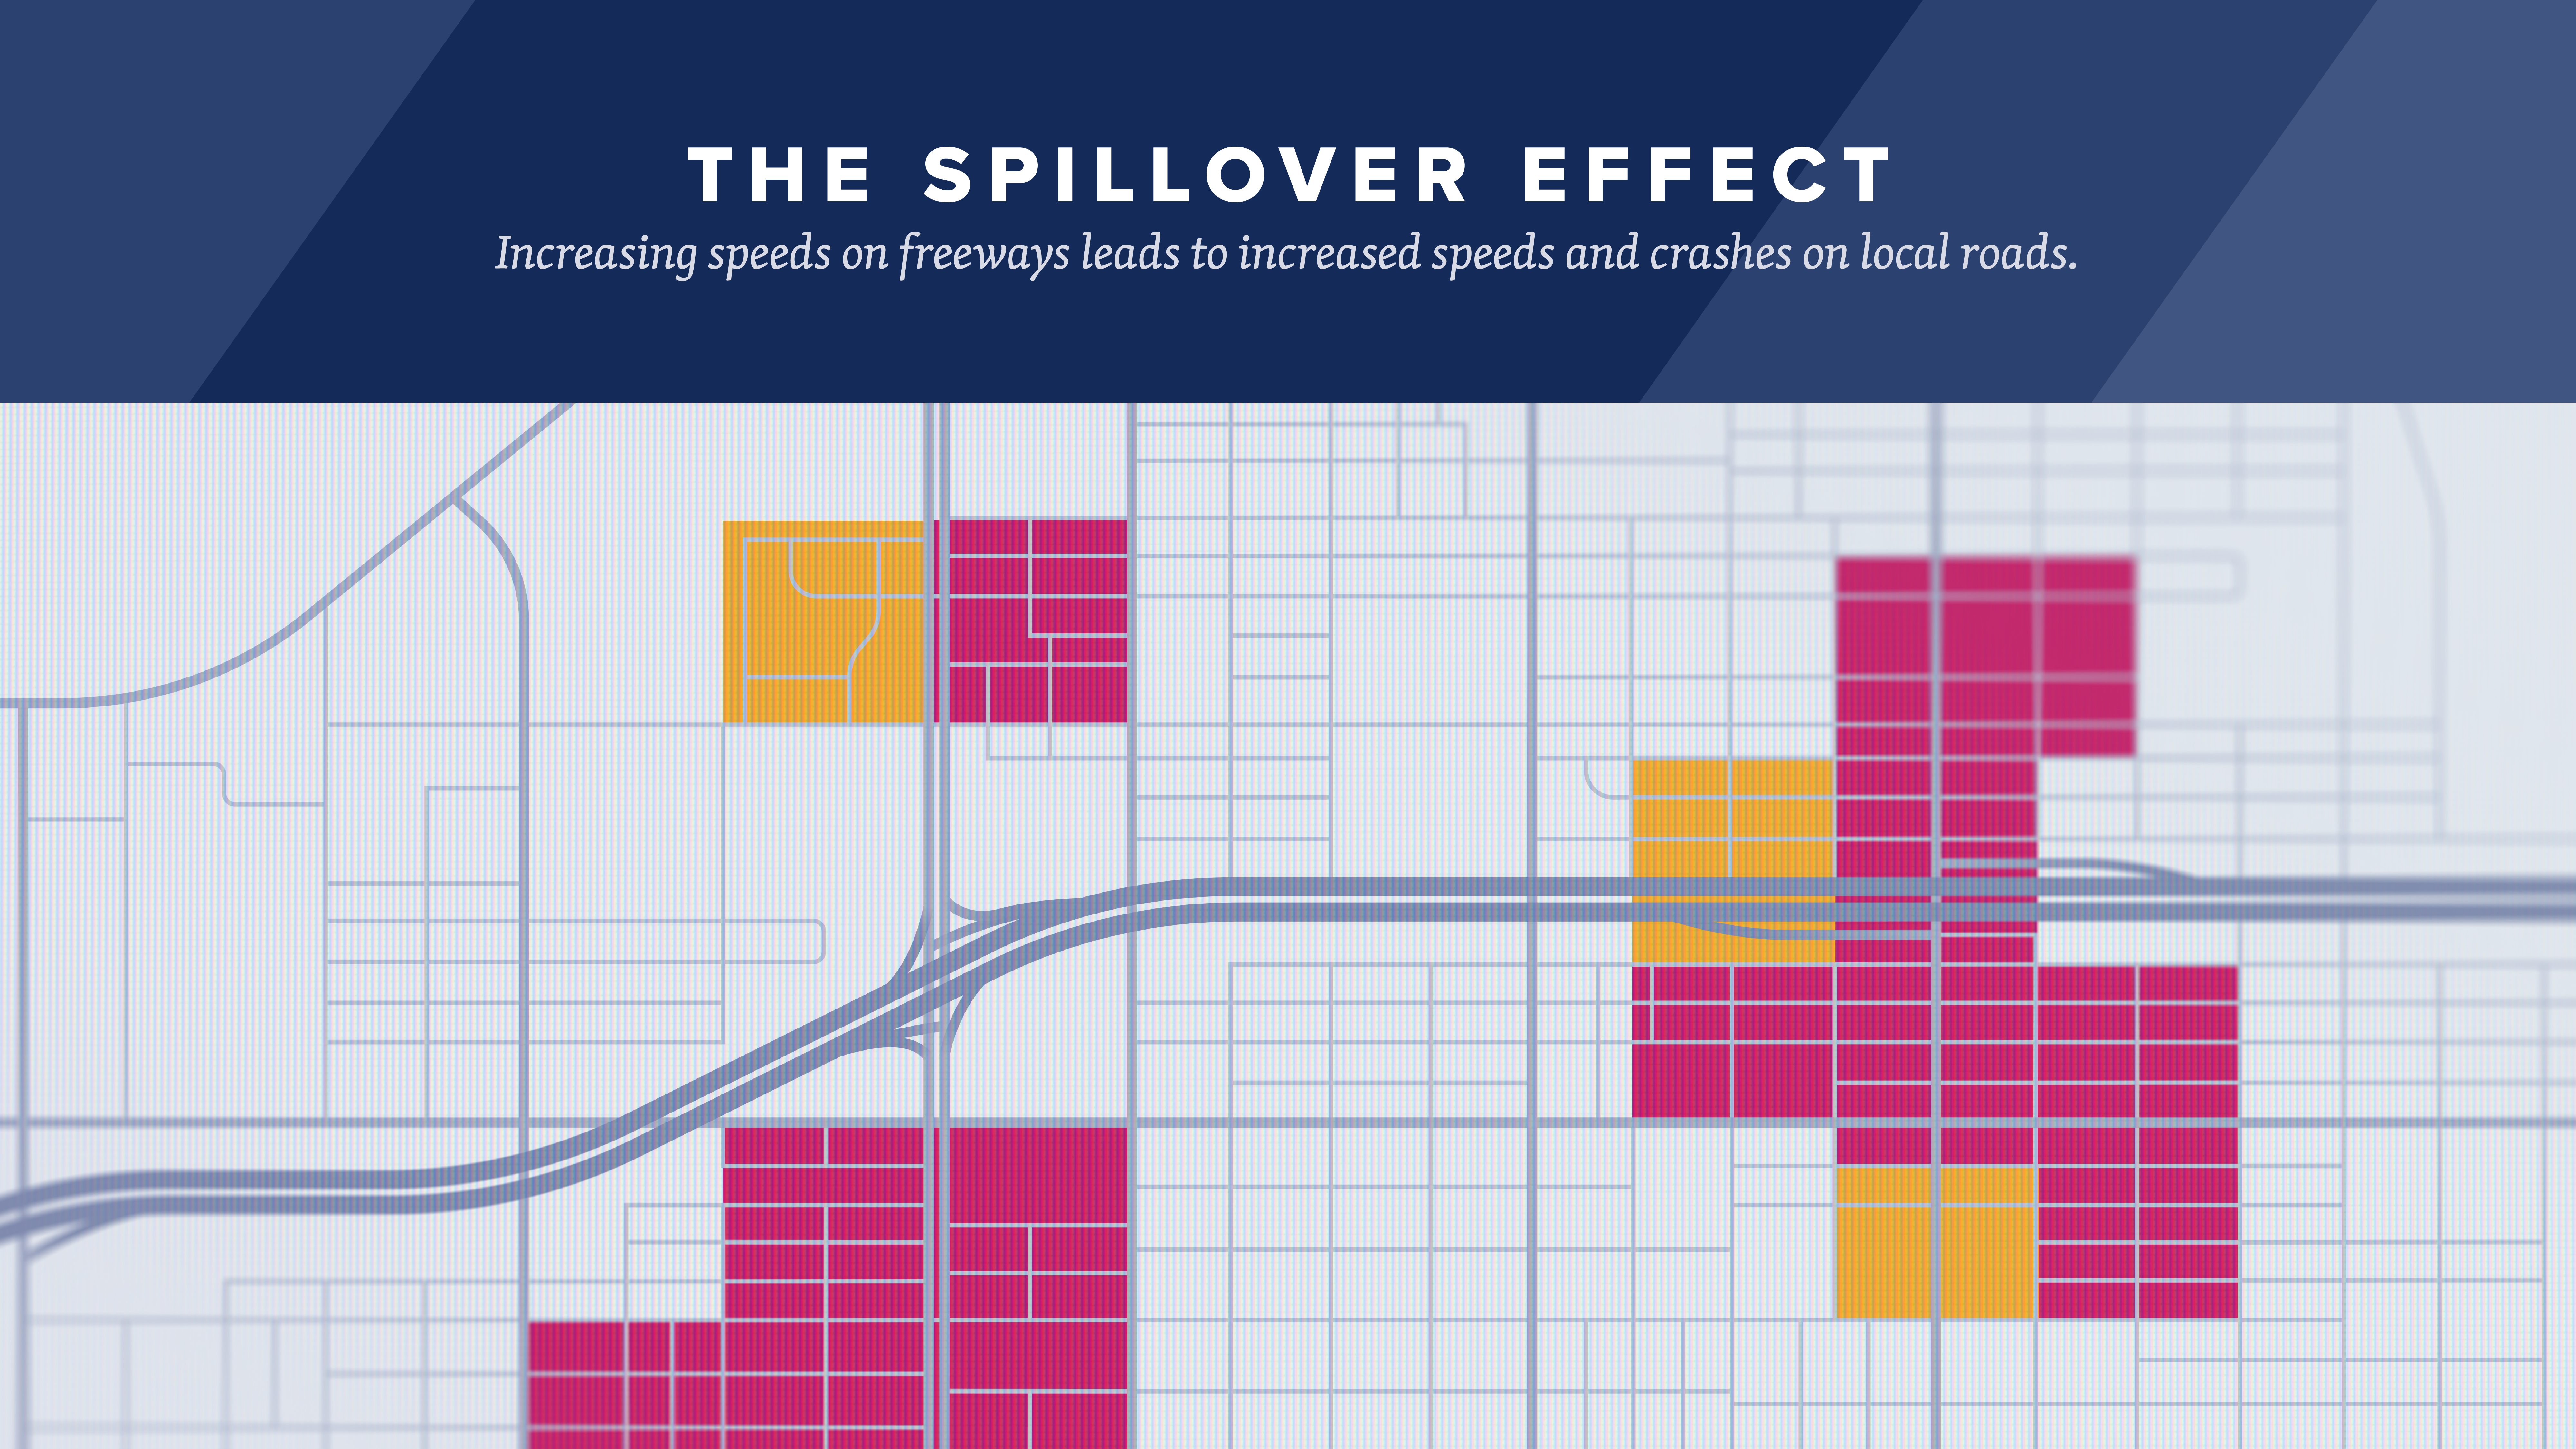 Spillover-Speed-Infographic-2.png detail image